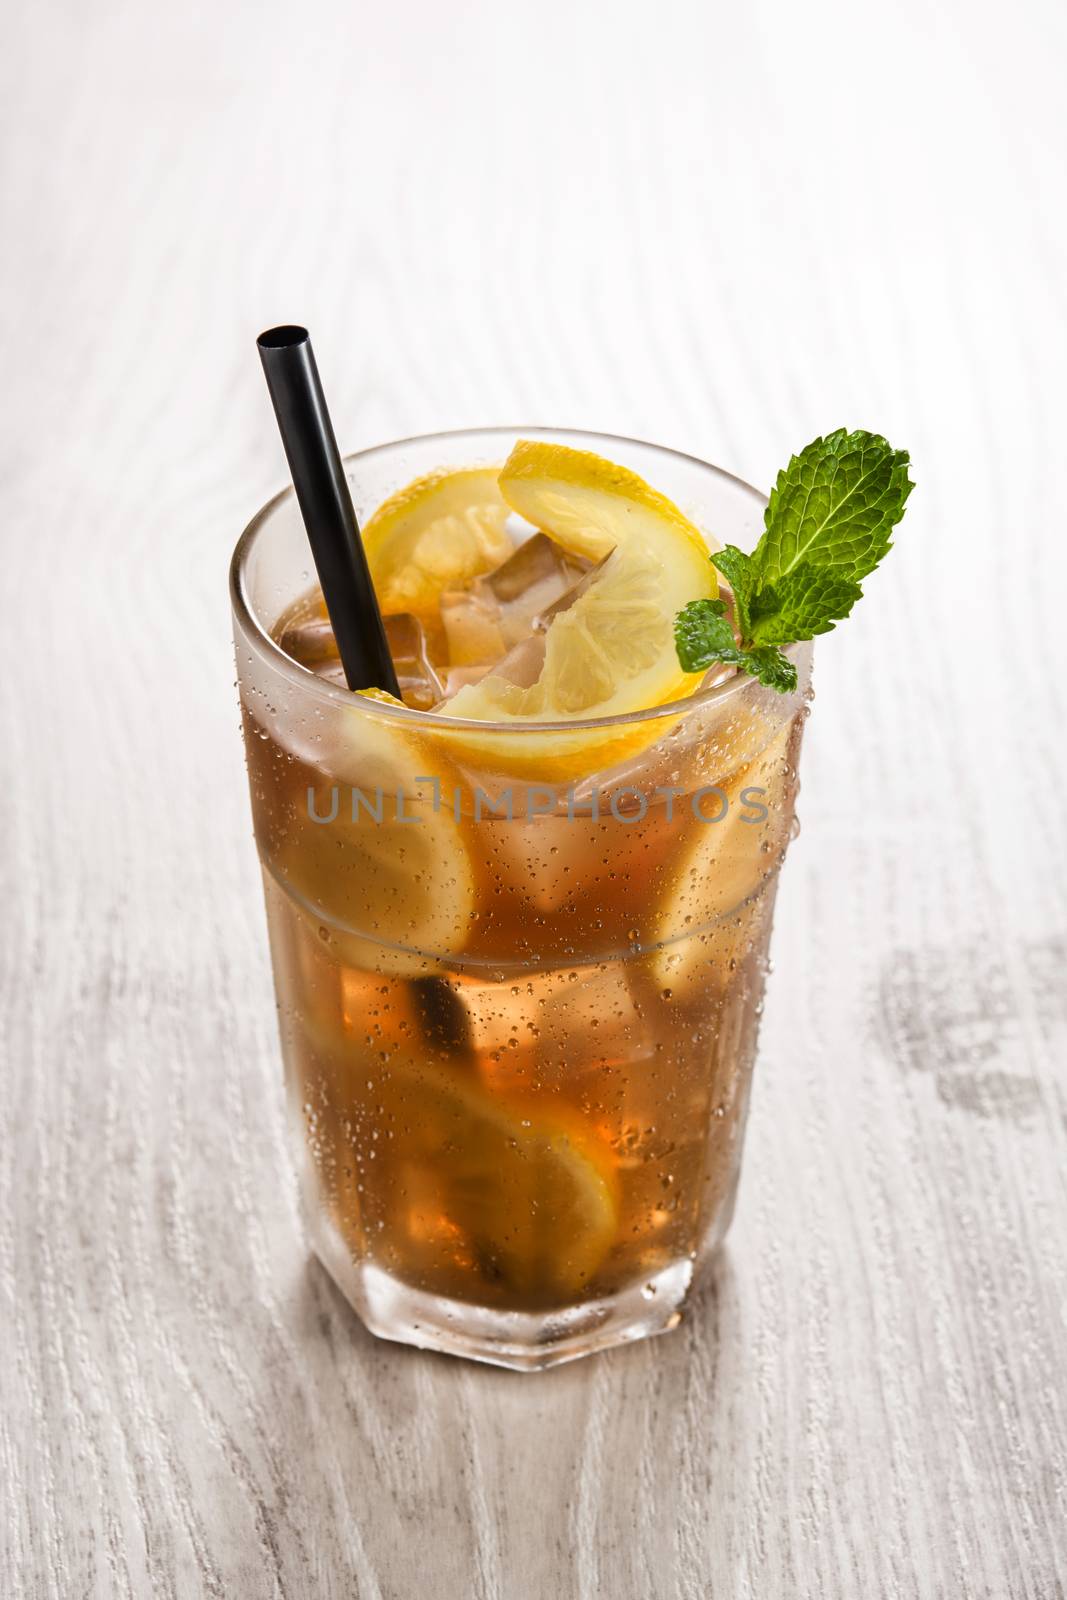 Iced tea drink with lemon in glass on white wooden table